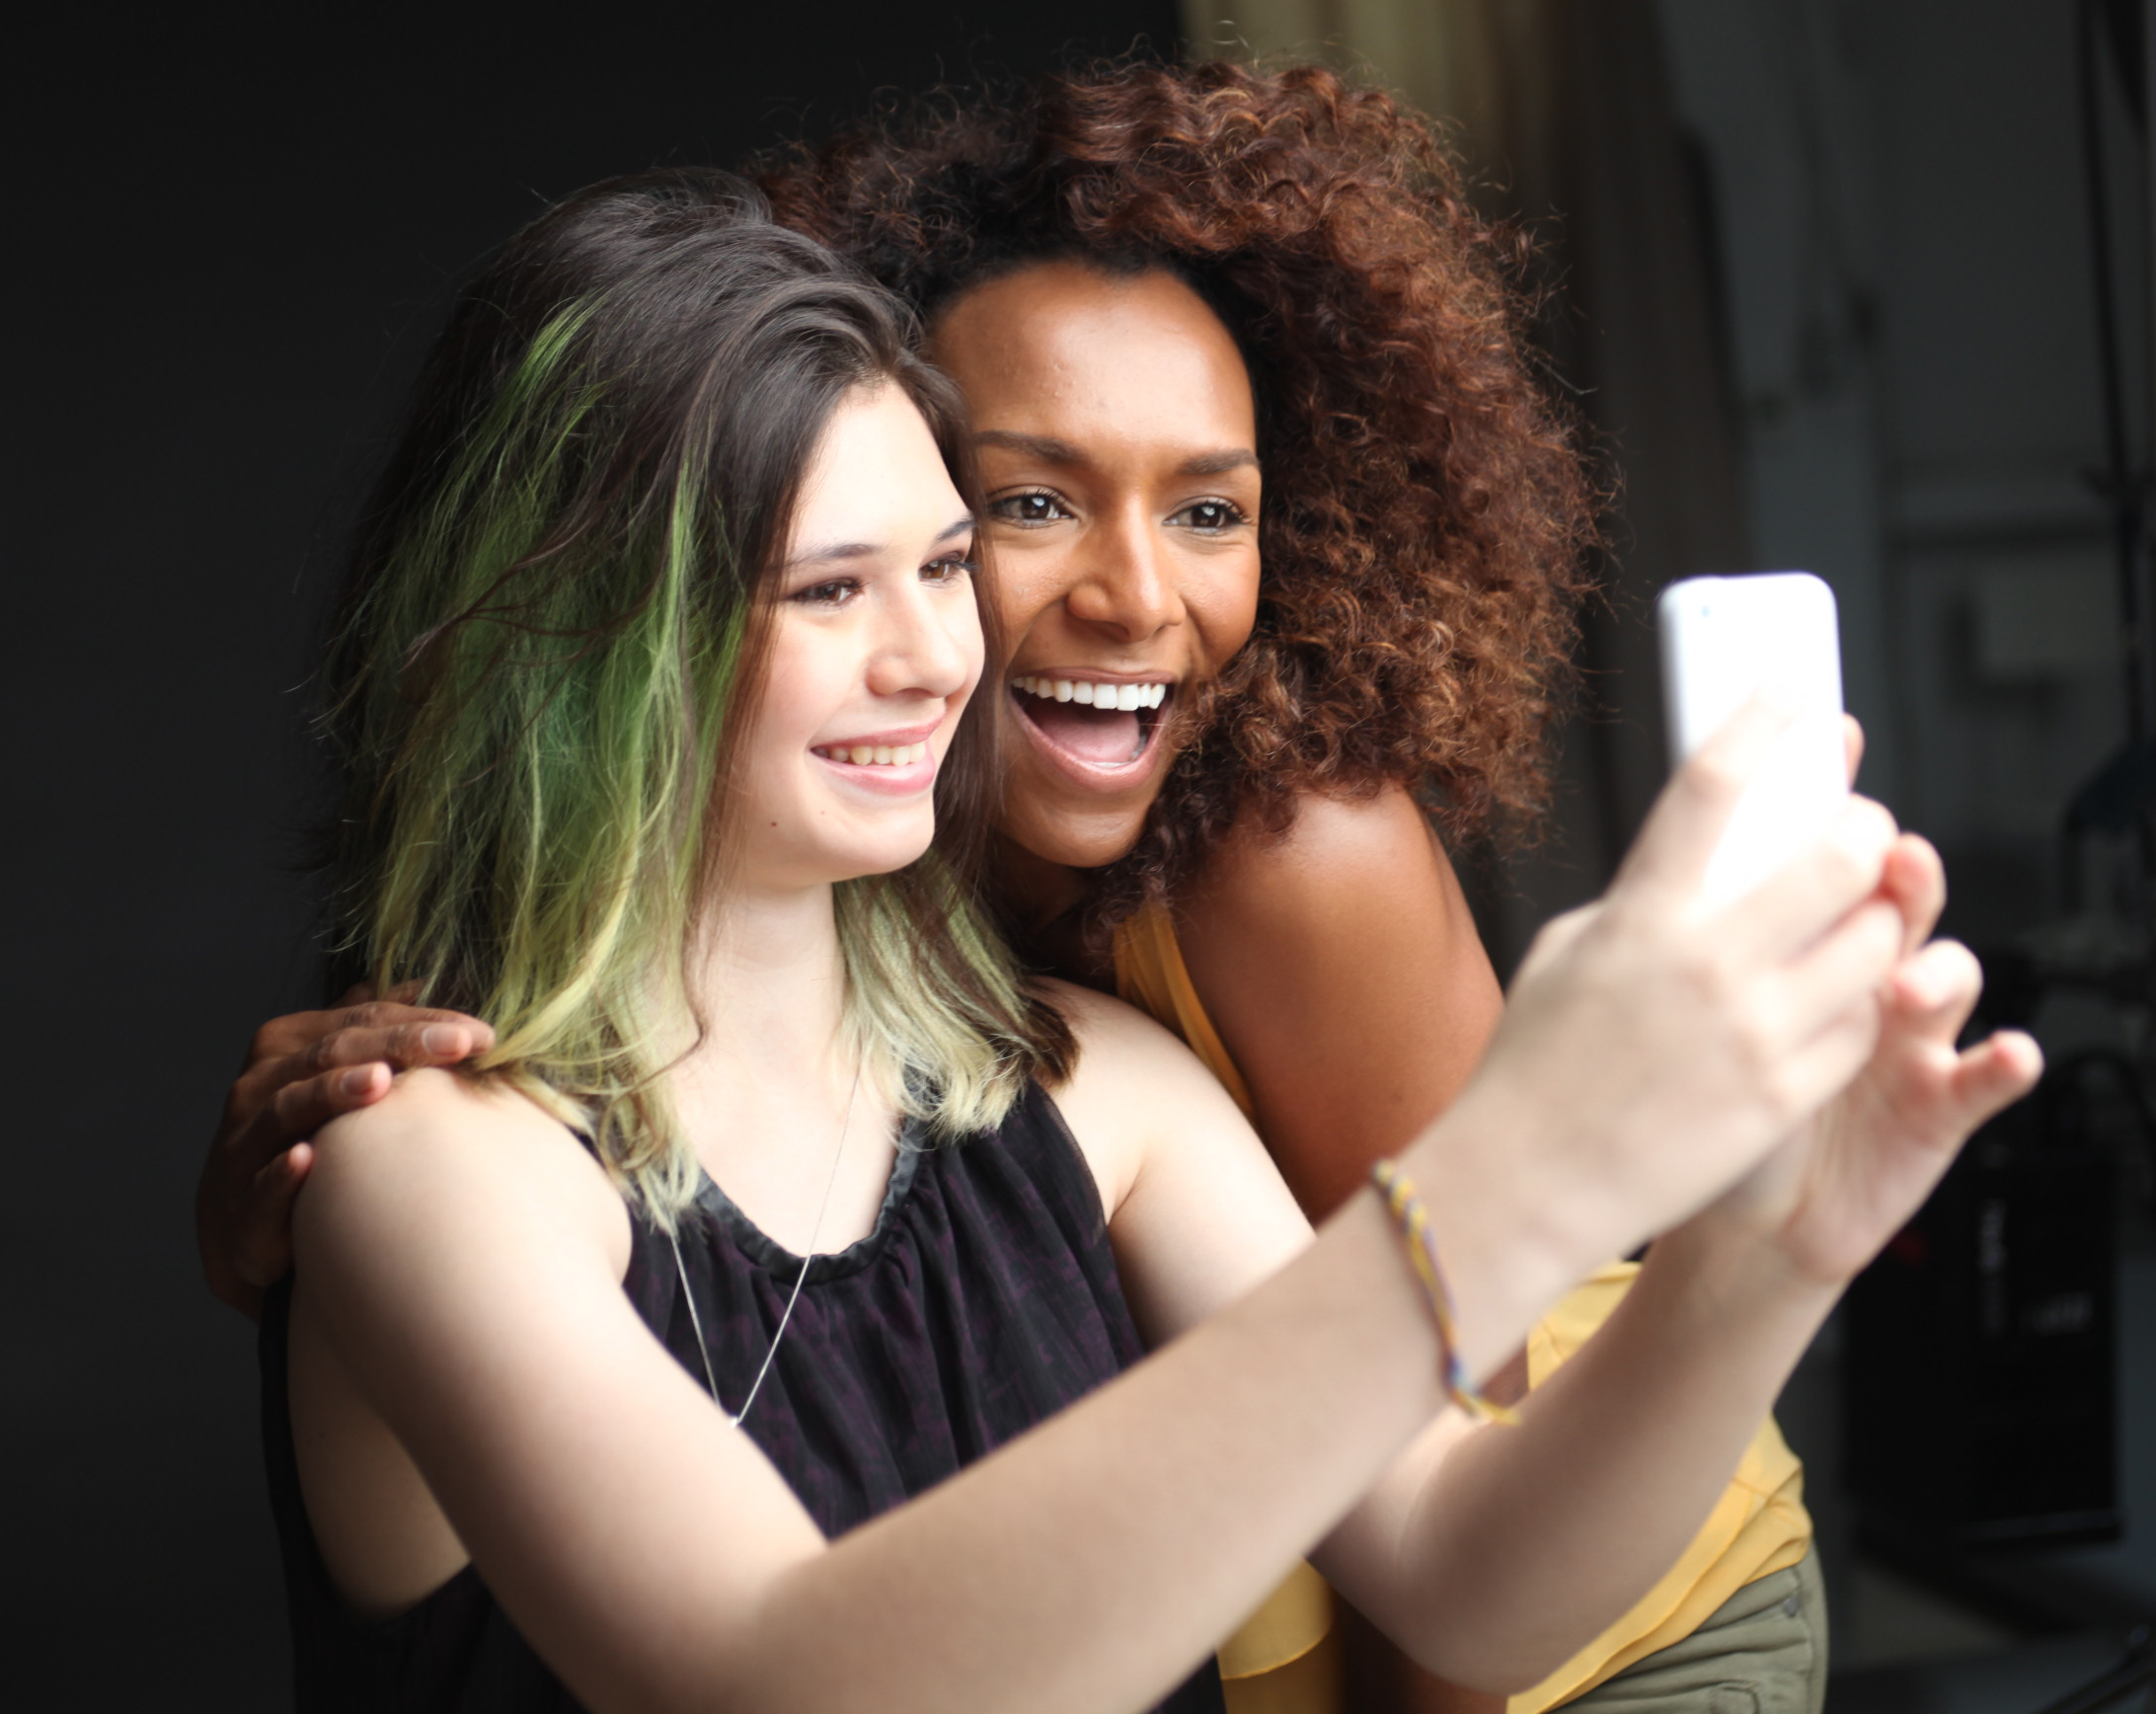 Nicole Maines, whose family won a case in the Supreme Court of Maine over bathroom use, takes a selfie with Mock on the set of The Trans List. (Timothy Greenfield-Sanders / Courtesy of HBO)